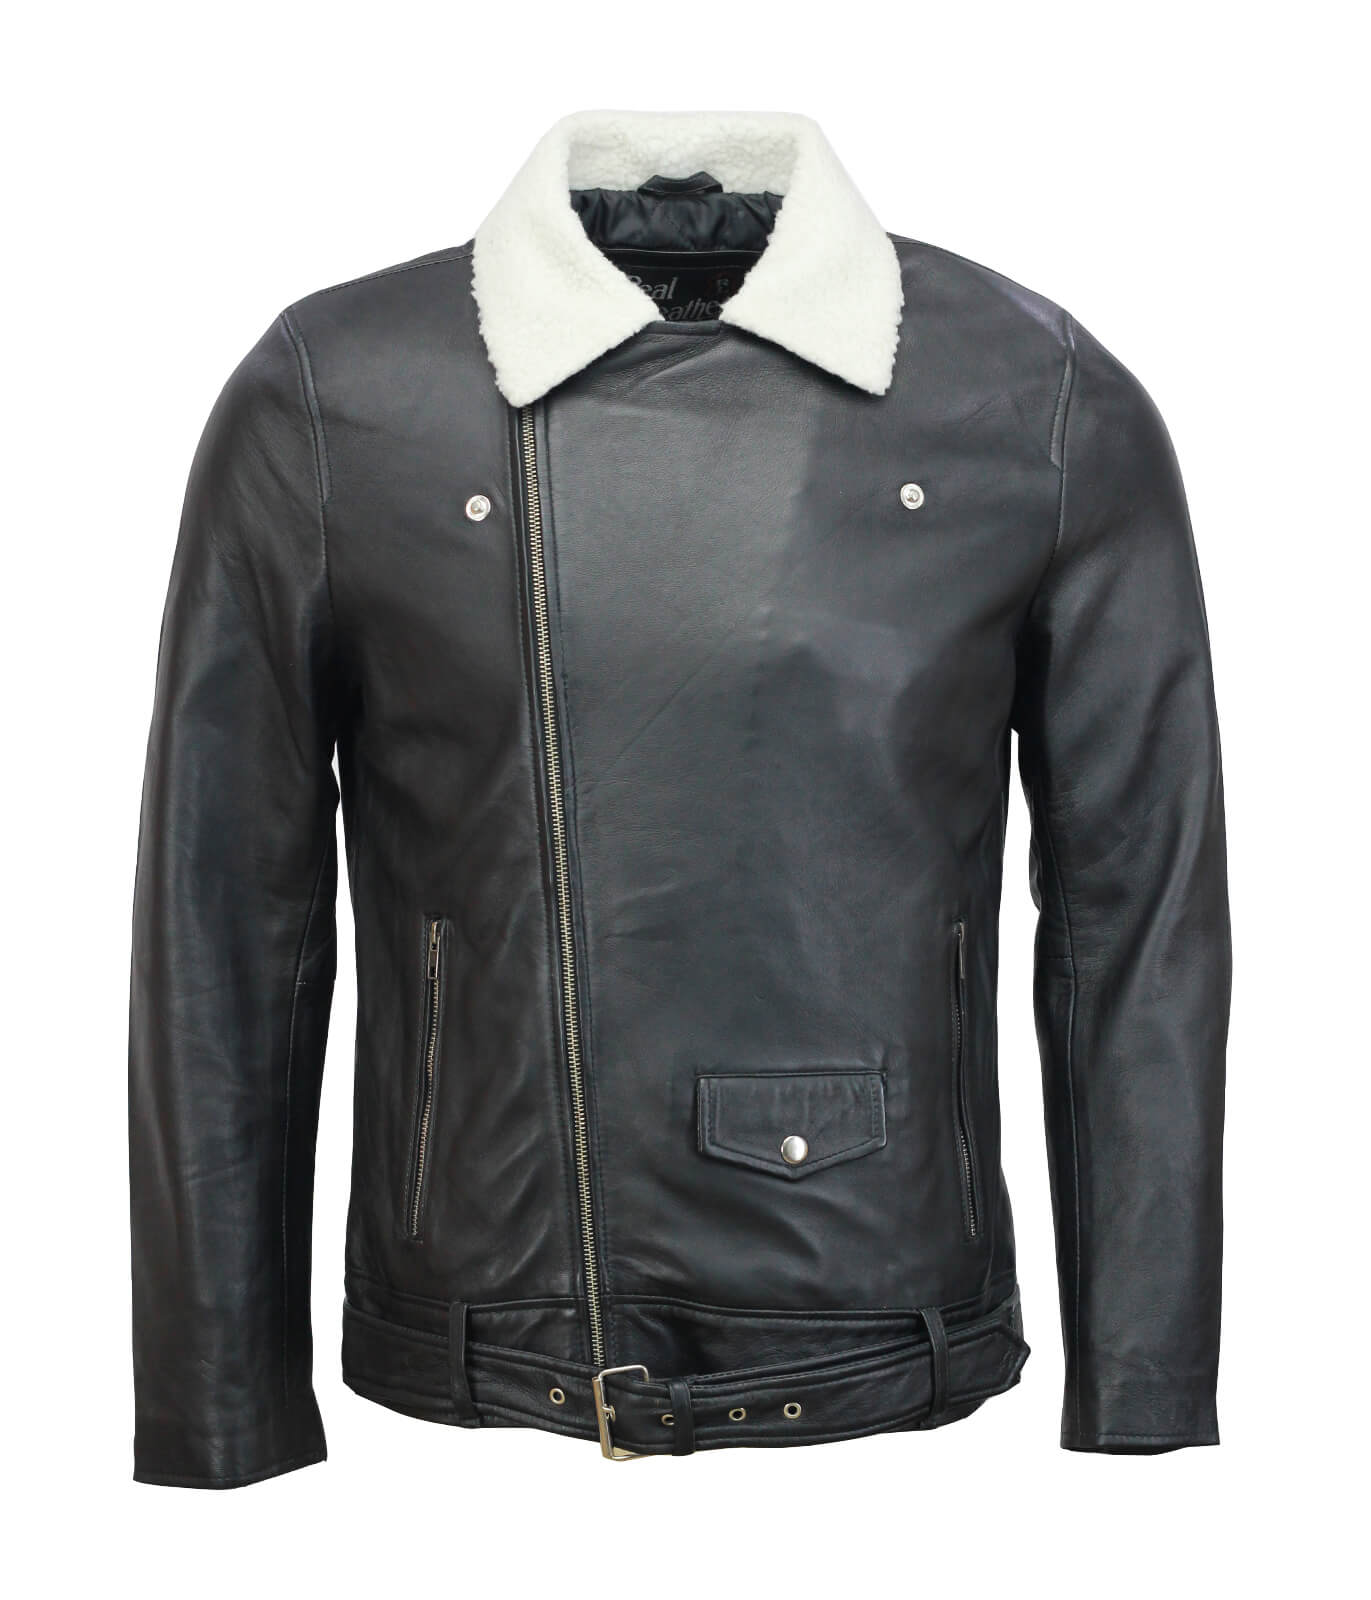 Black Motorcycle Genuine Leather Jacket With Fur Collar And Belt